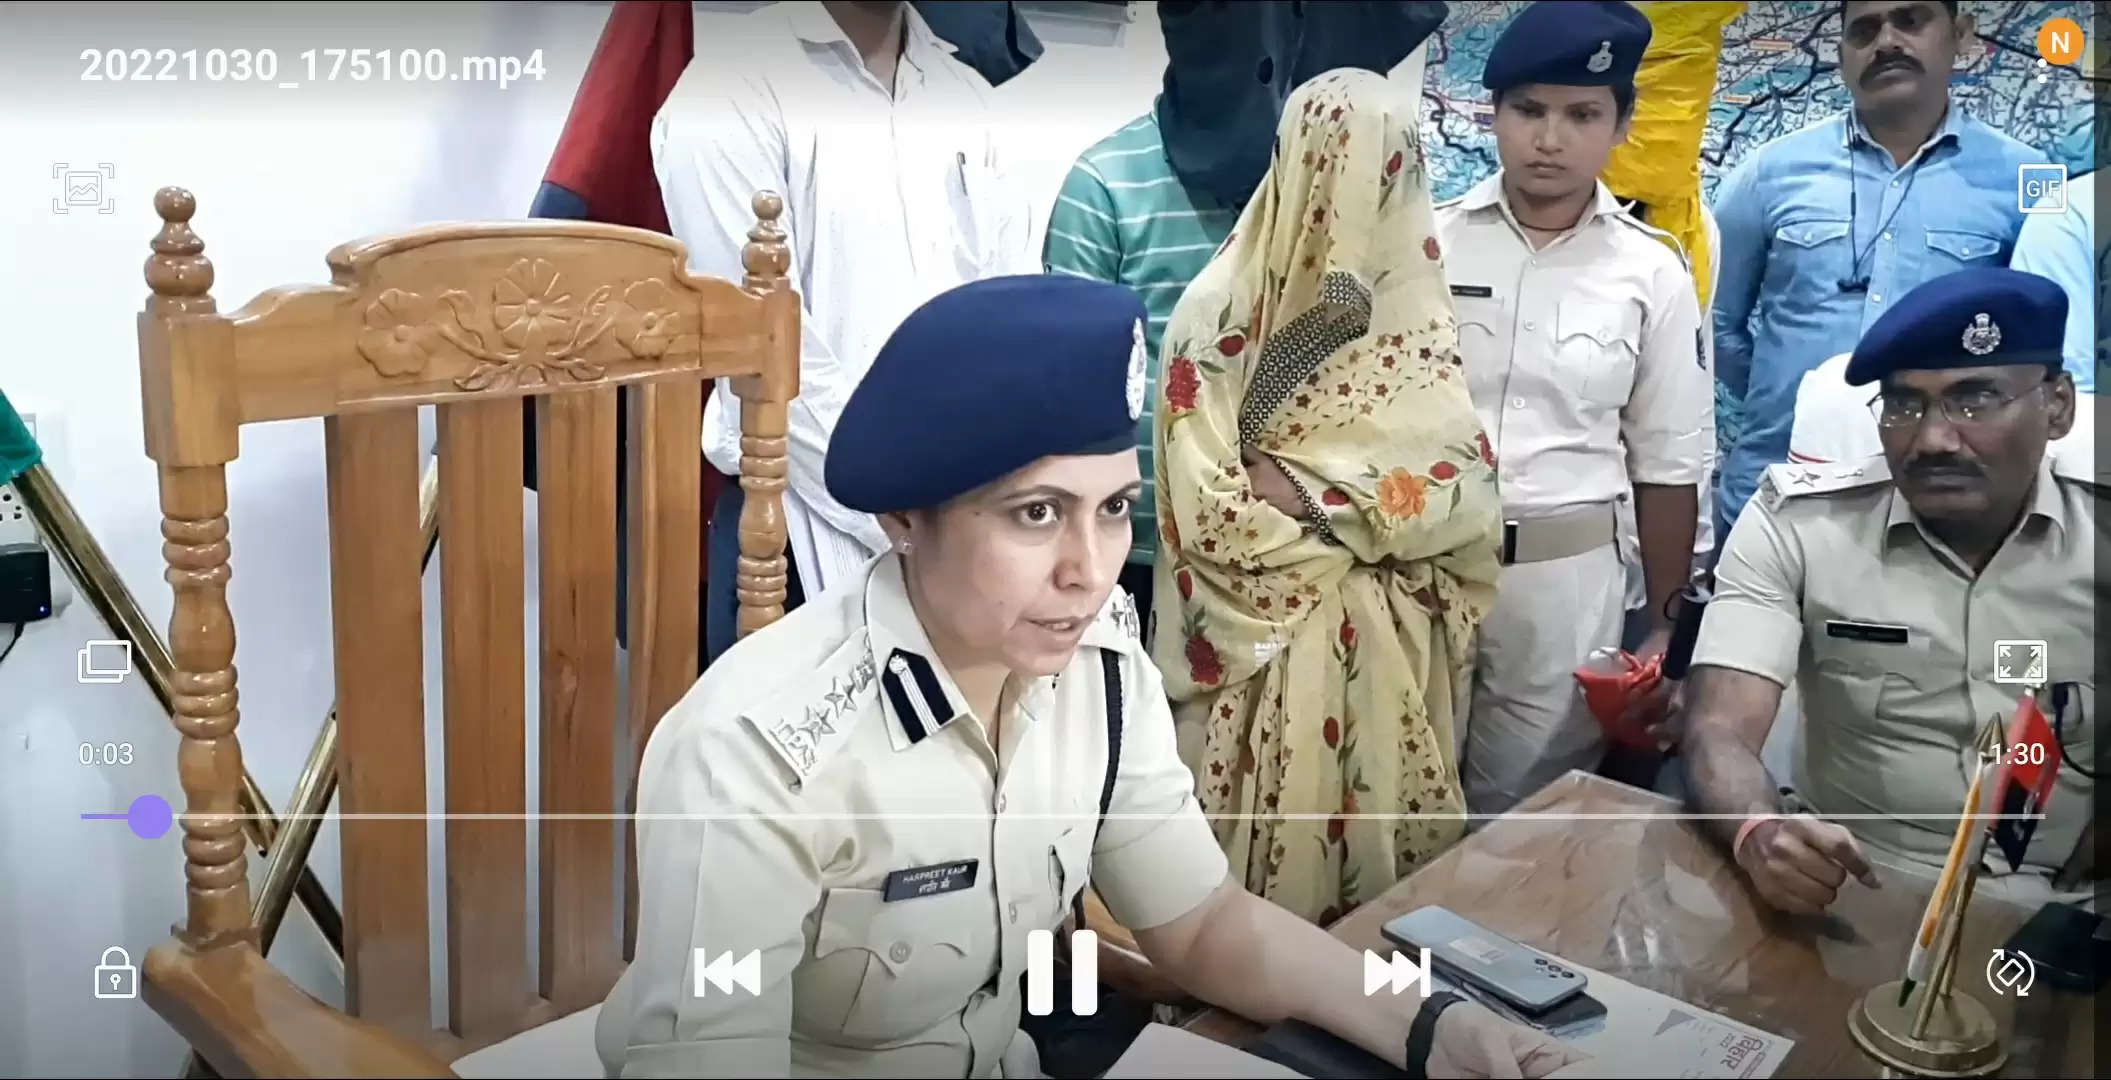 Rs 9.4 lakh loot in Gaya's Dobhi: Five included a woman arrested